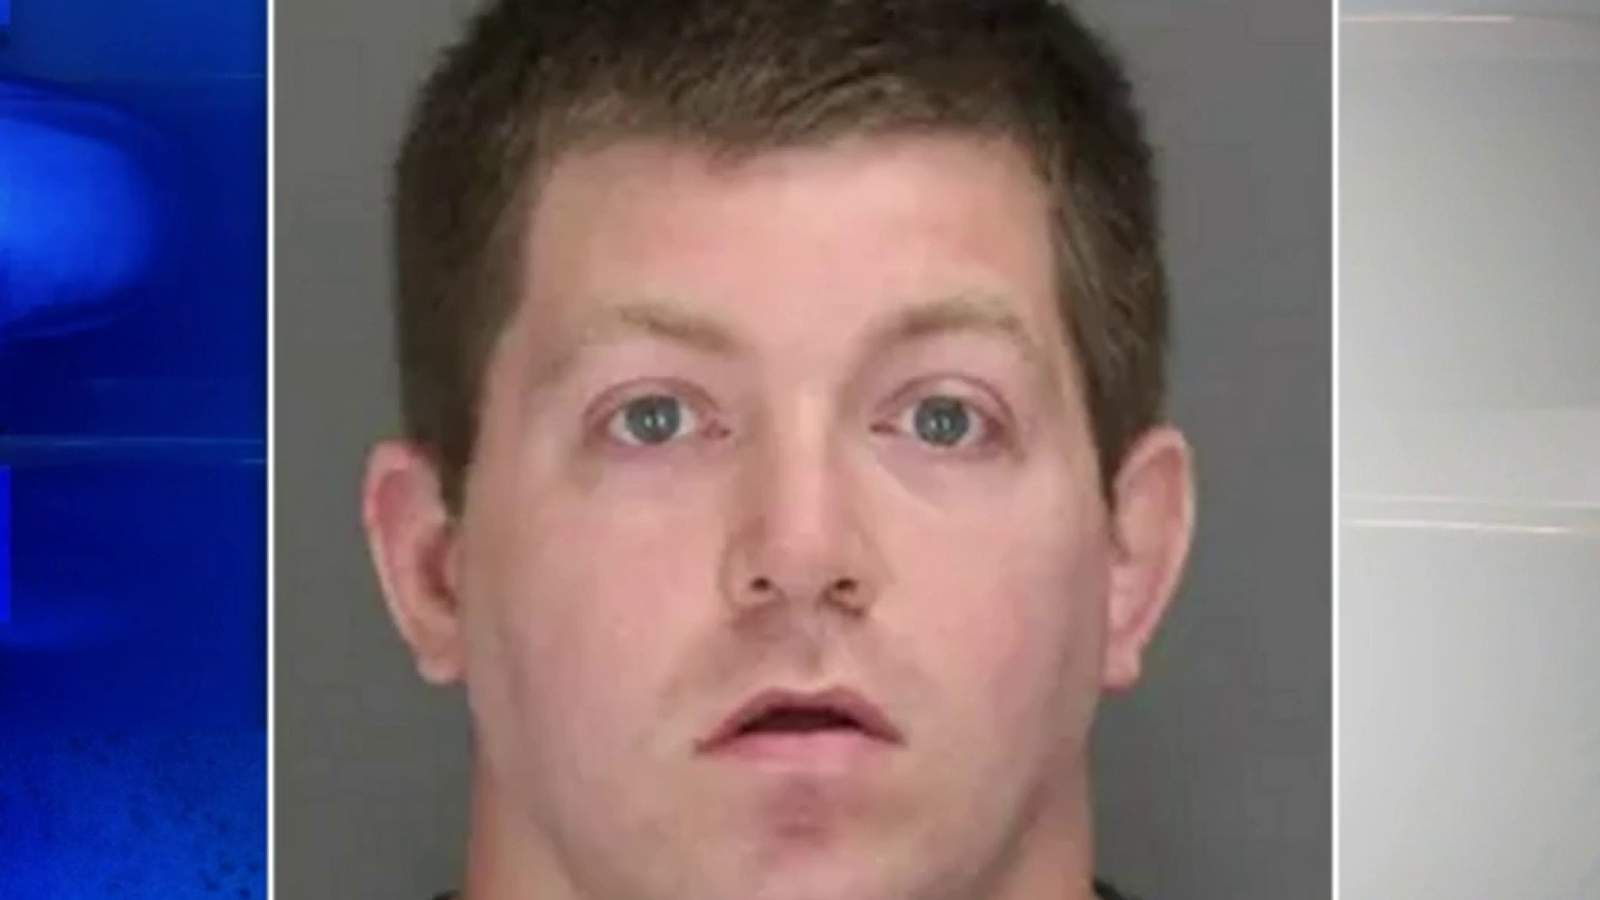 Pontiac man charged with sexually abusing 12-year-old Allen Park girl